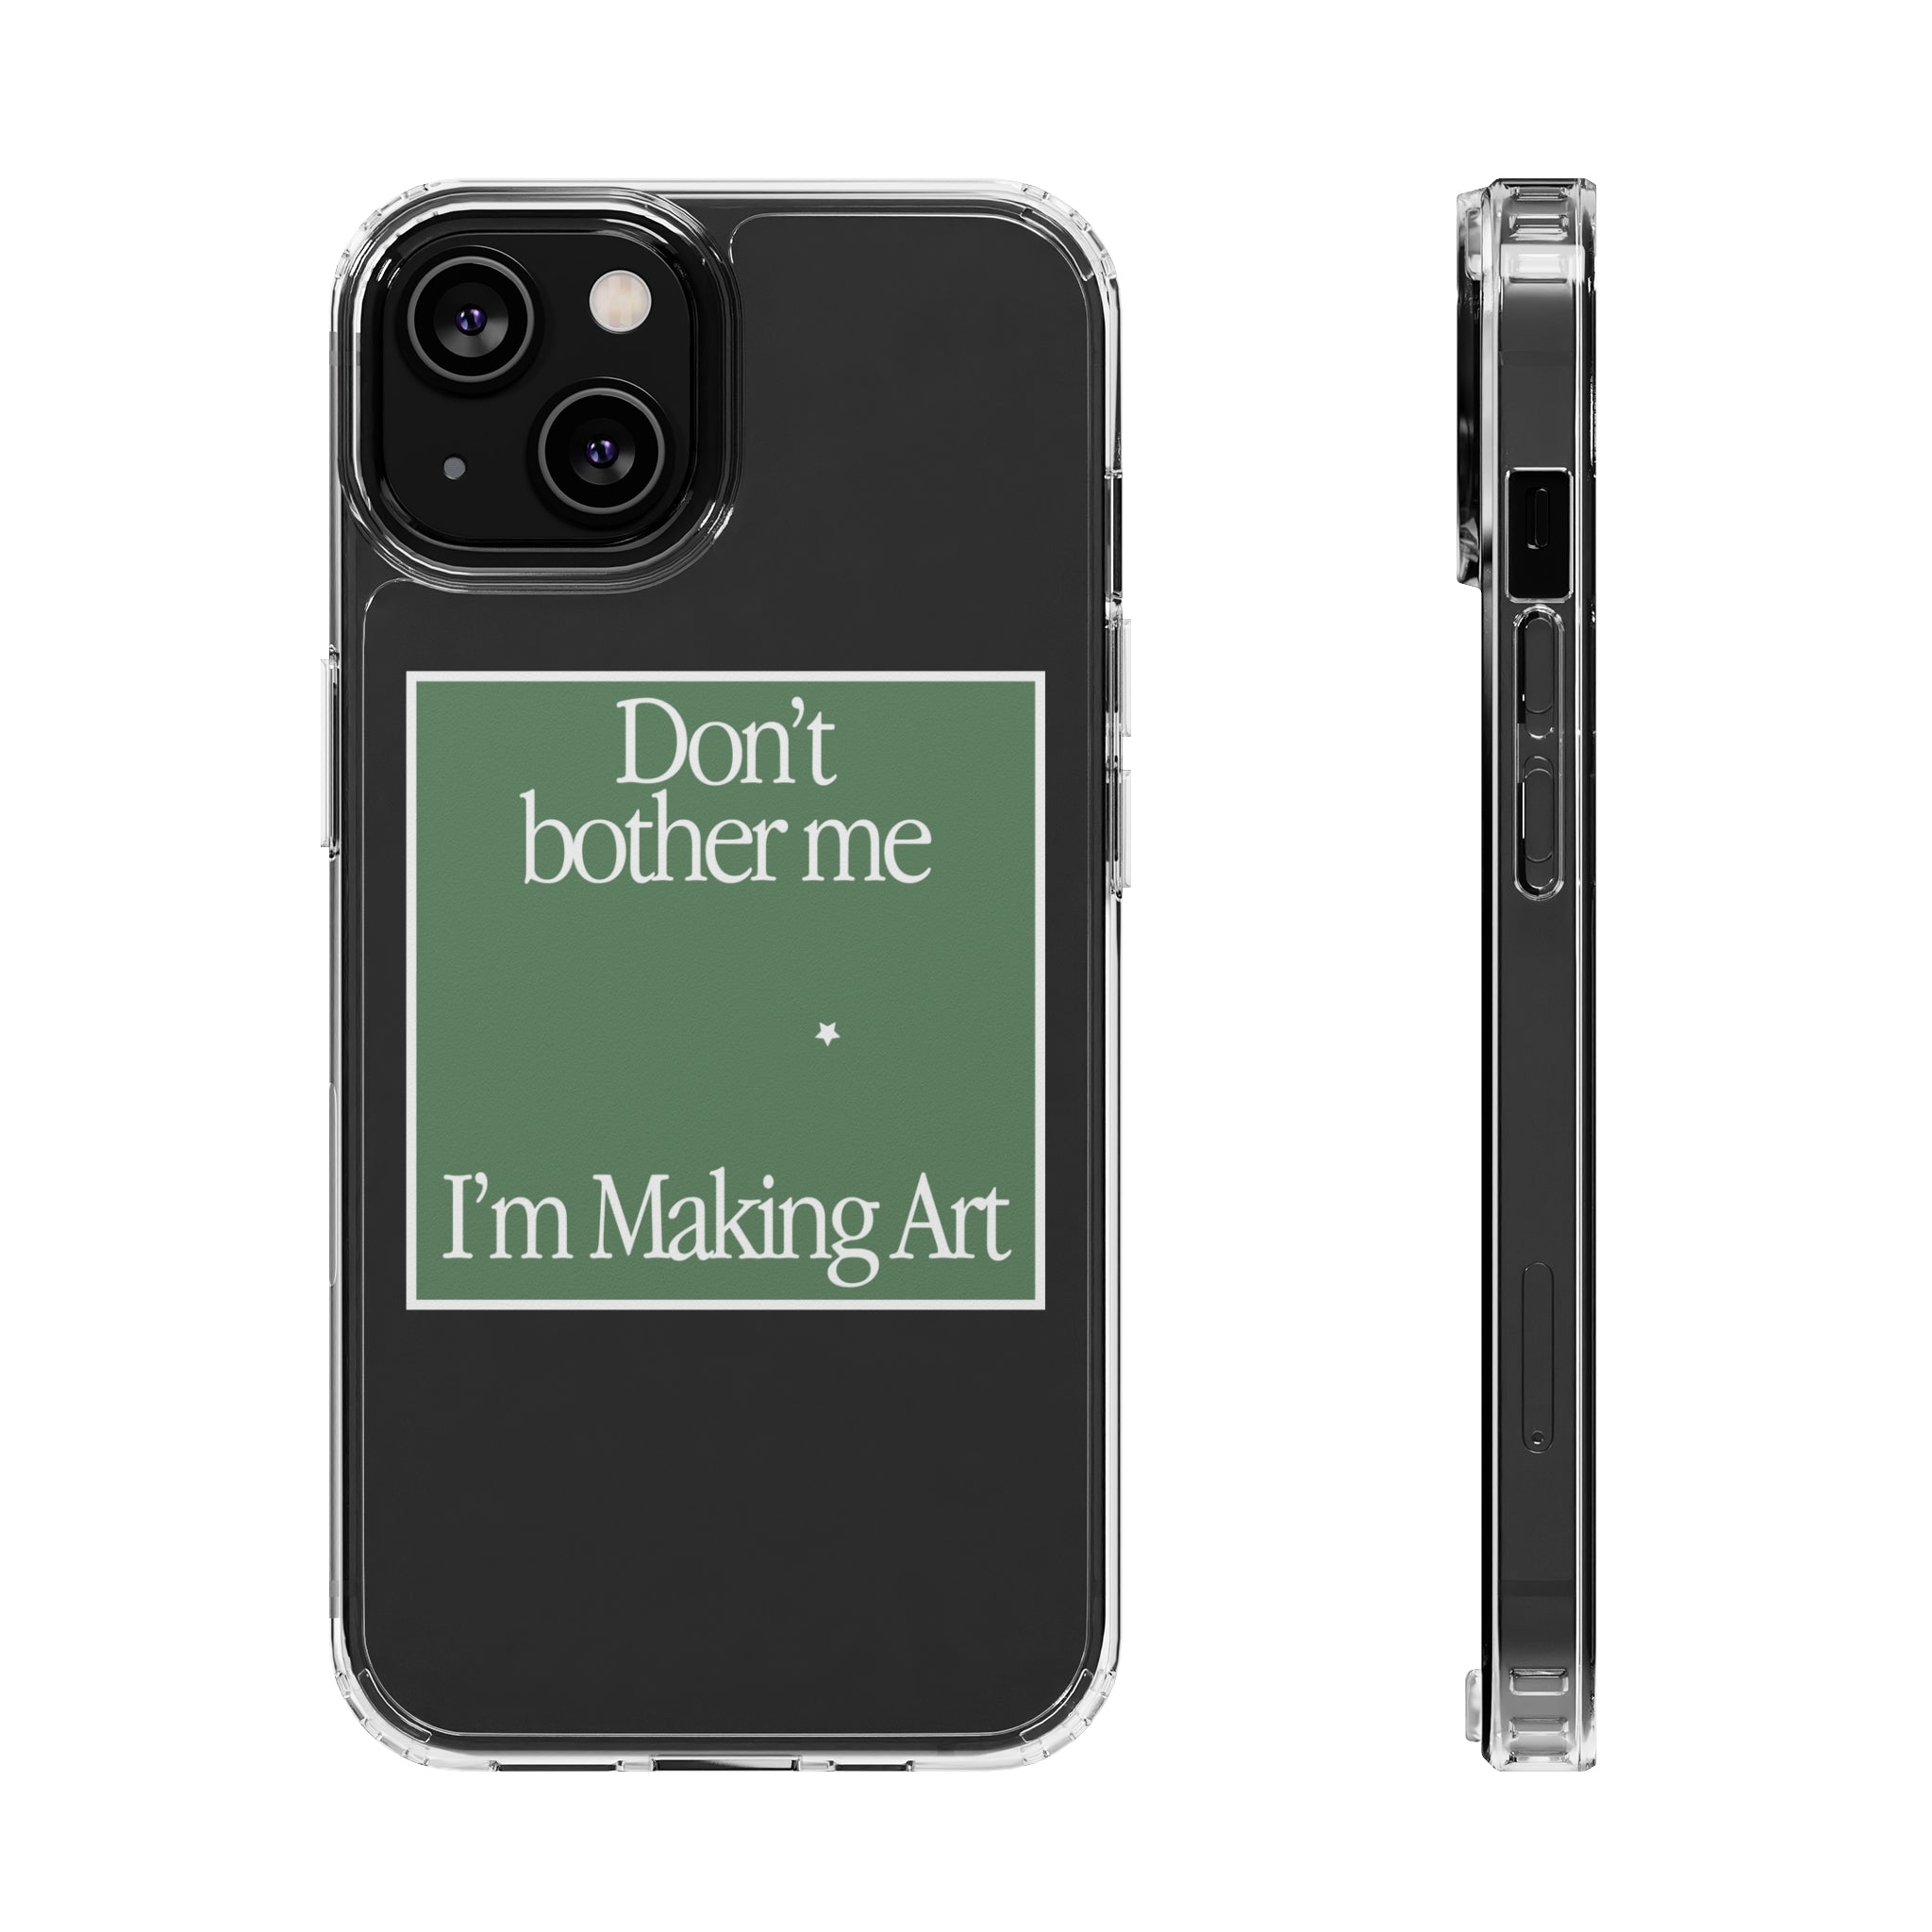 Don't Bother Me iPhone Case